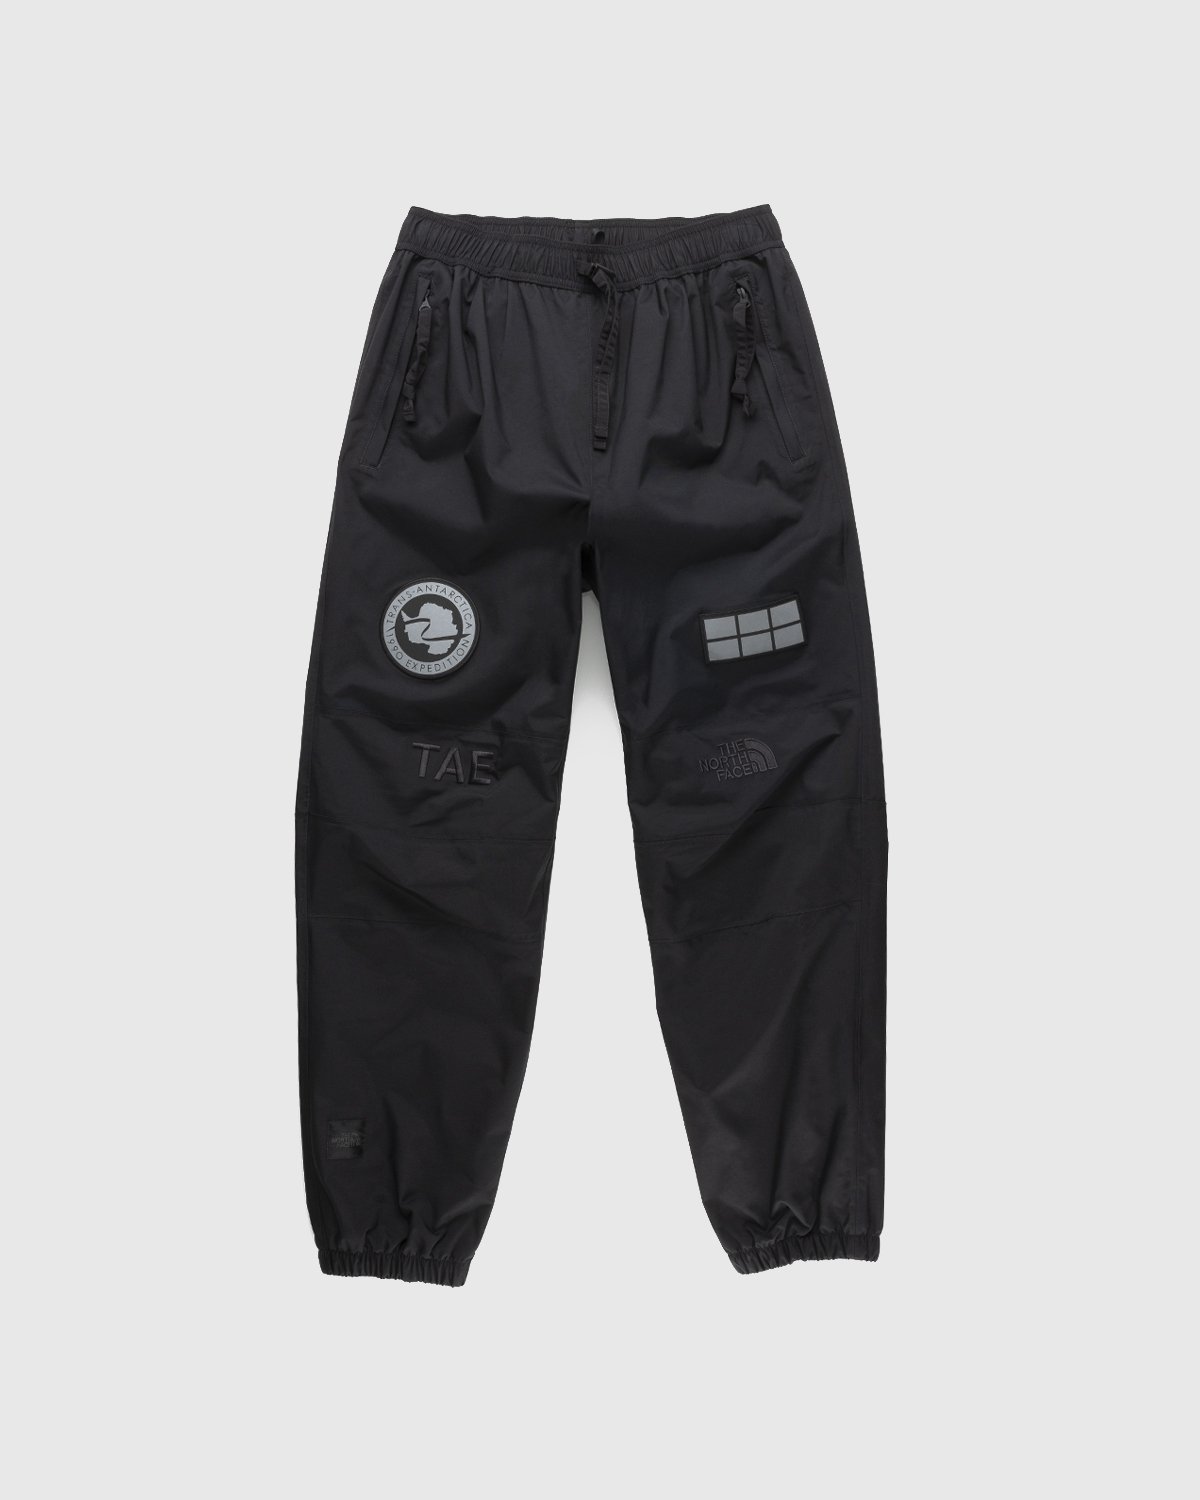 The North Face - Trans Antarctica Expedition Pant Black - Clothing - Black - Image 1